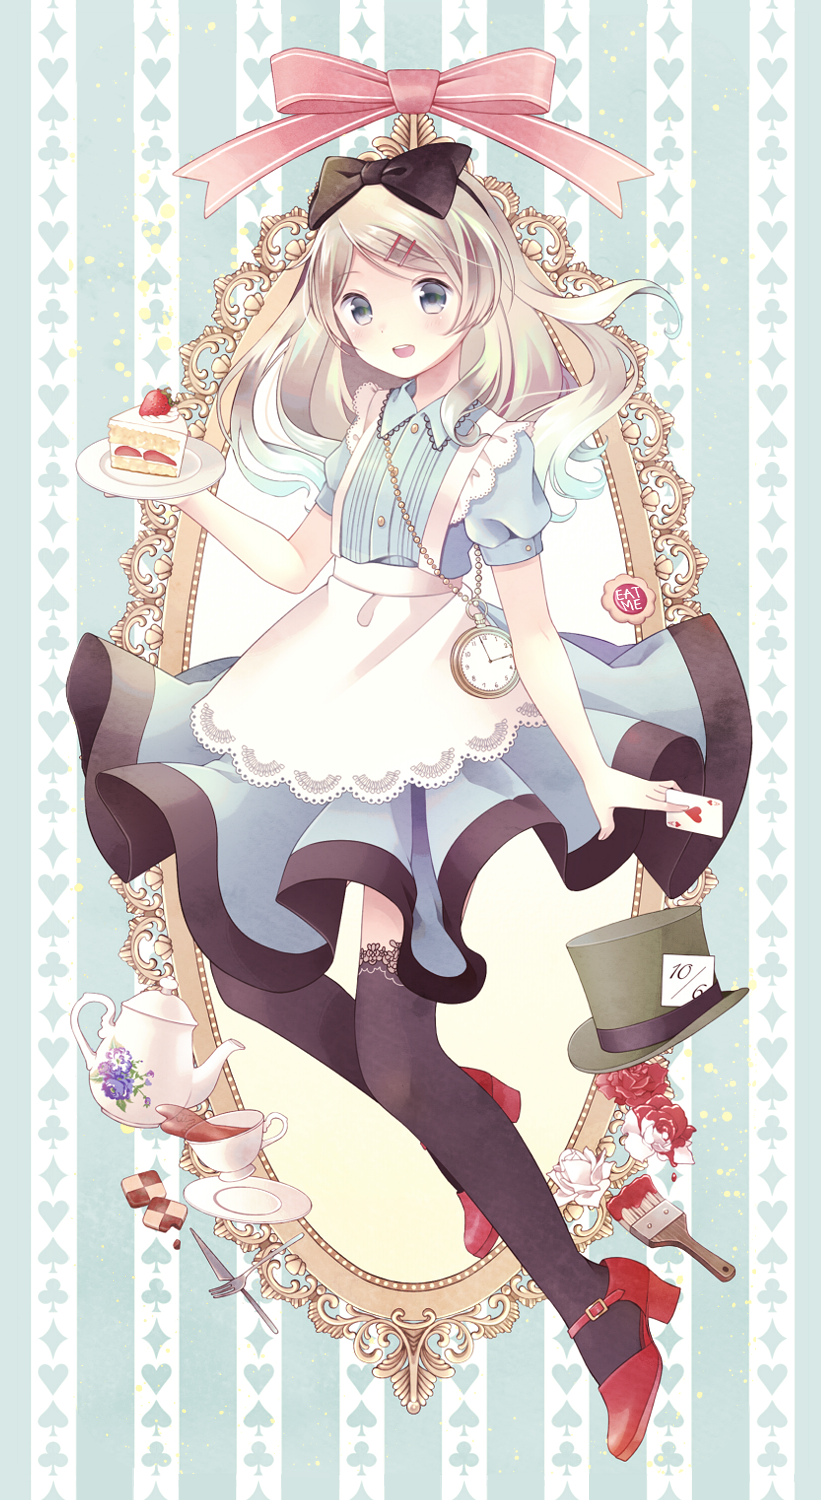 1girl ace_of_hearts alice_(alice_in_wonderland) alice_in_wonderland black_bow black_socks blue_dress blush bow cake card cookie cup dessert dress edamame_888 empty_picture_frame flower food fork fruit grey_eyes hair_bow hair_ornament hairclip hat heart high_heels highres holding holding_card holding_plate knife long_hair open_mouth paint_splatter paintbrush picture_frame pink_ribbon plate playing_card red_footwear ribbon rose socks solo strawberry strawberry_shortcake tea teacup teapot top_hat trim_brush utensil white_flower white_rose